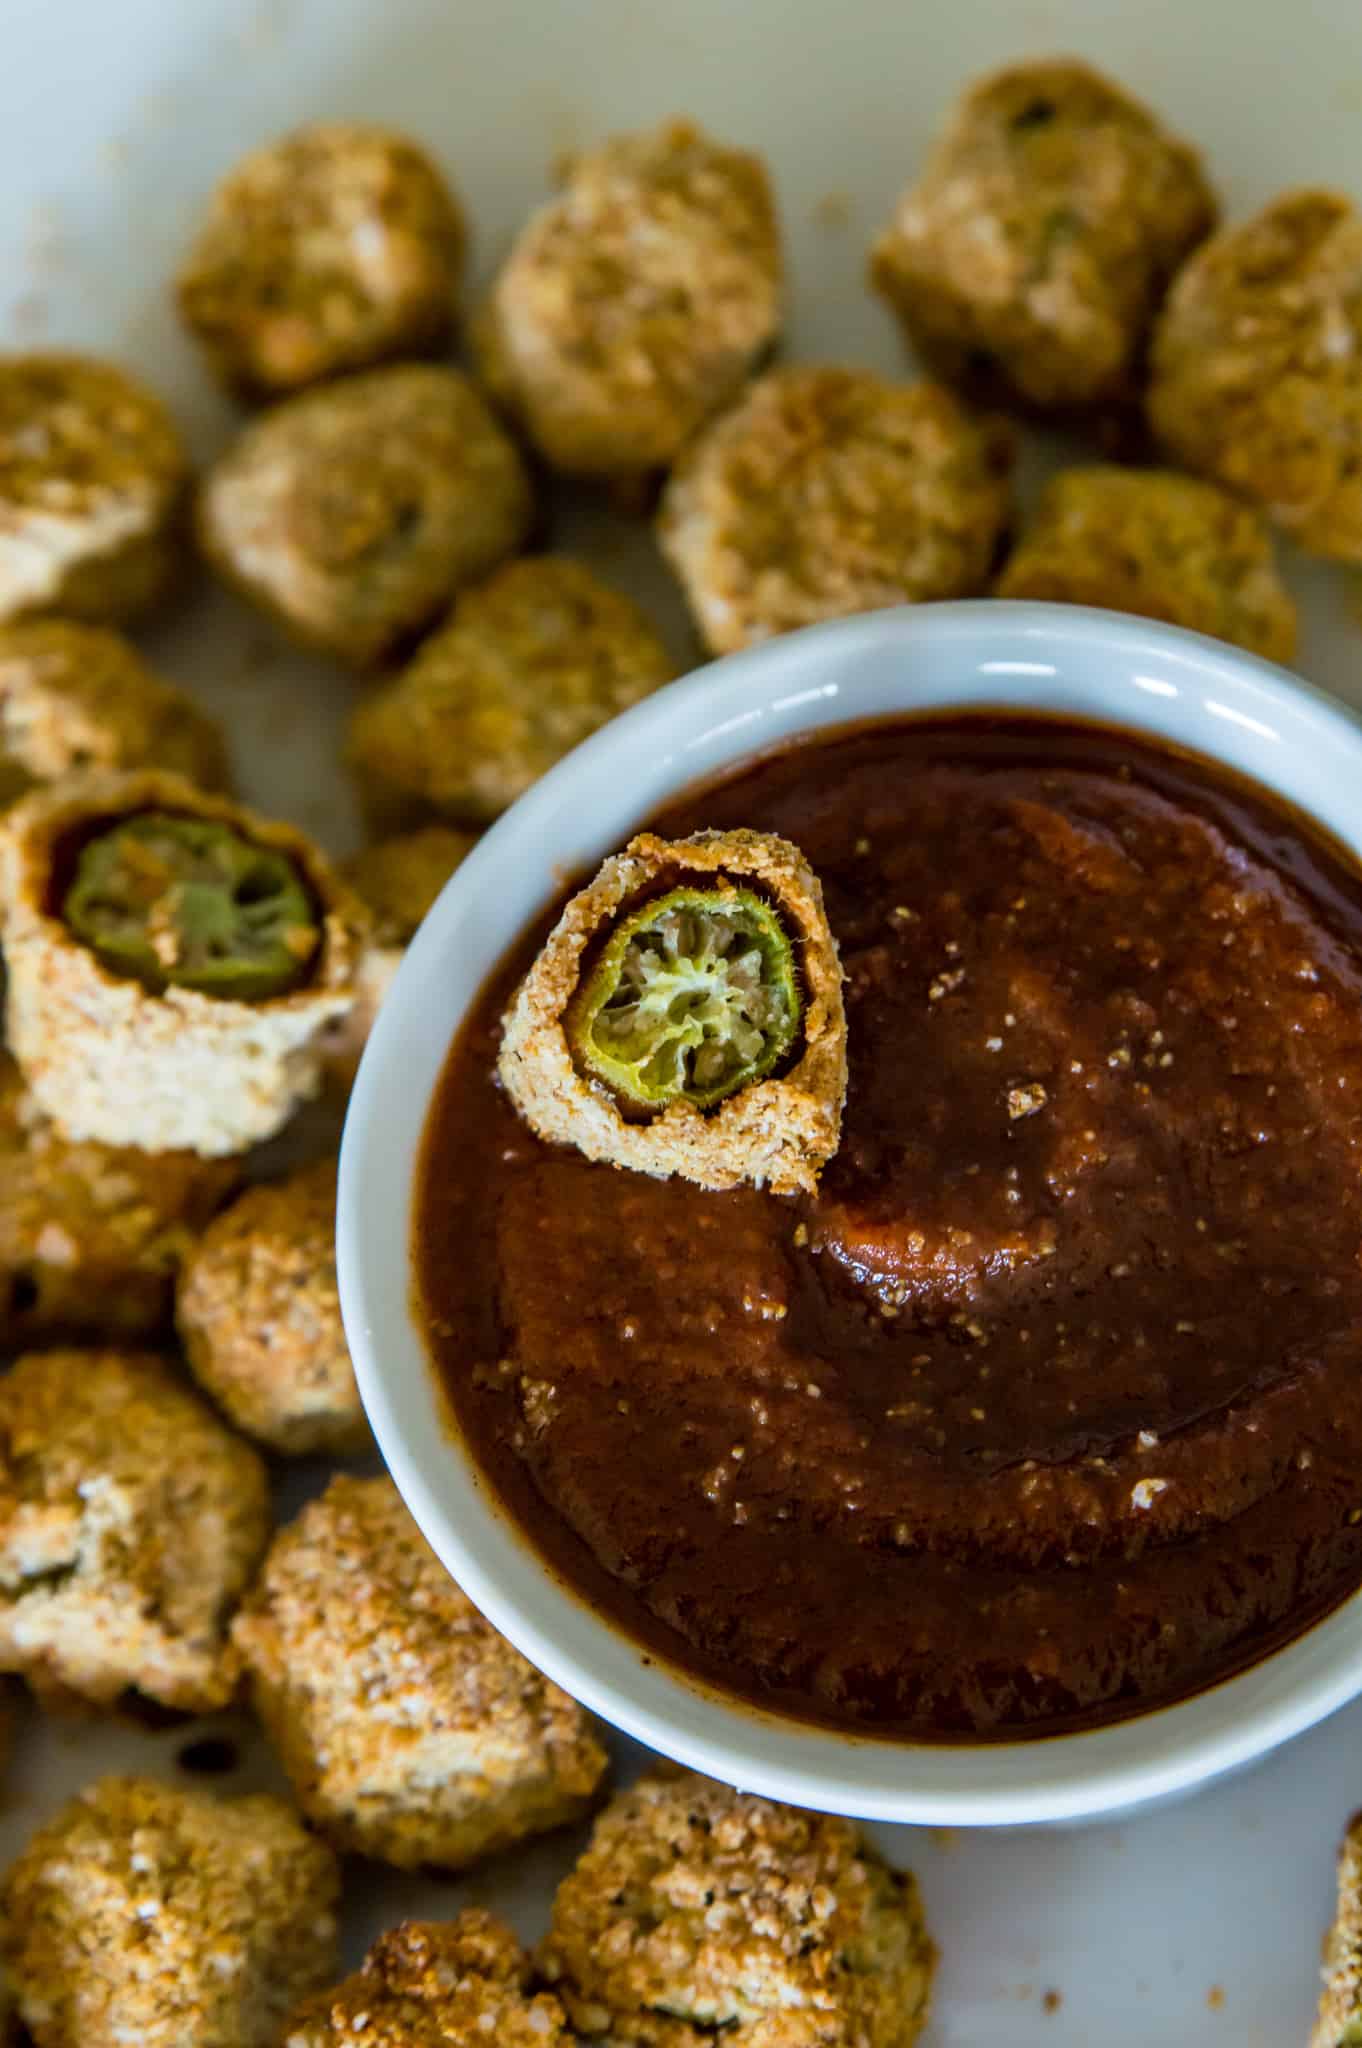 Fried Okra with a breaded coating on a plate with bbq sauce